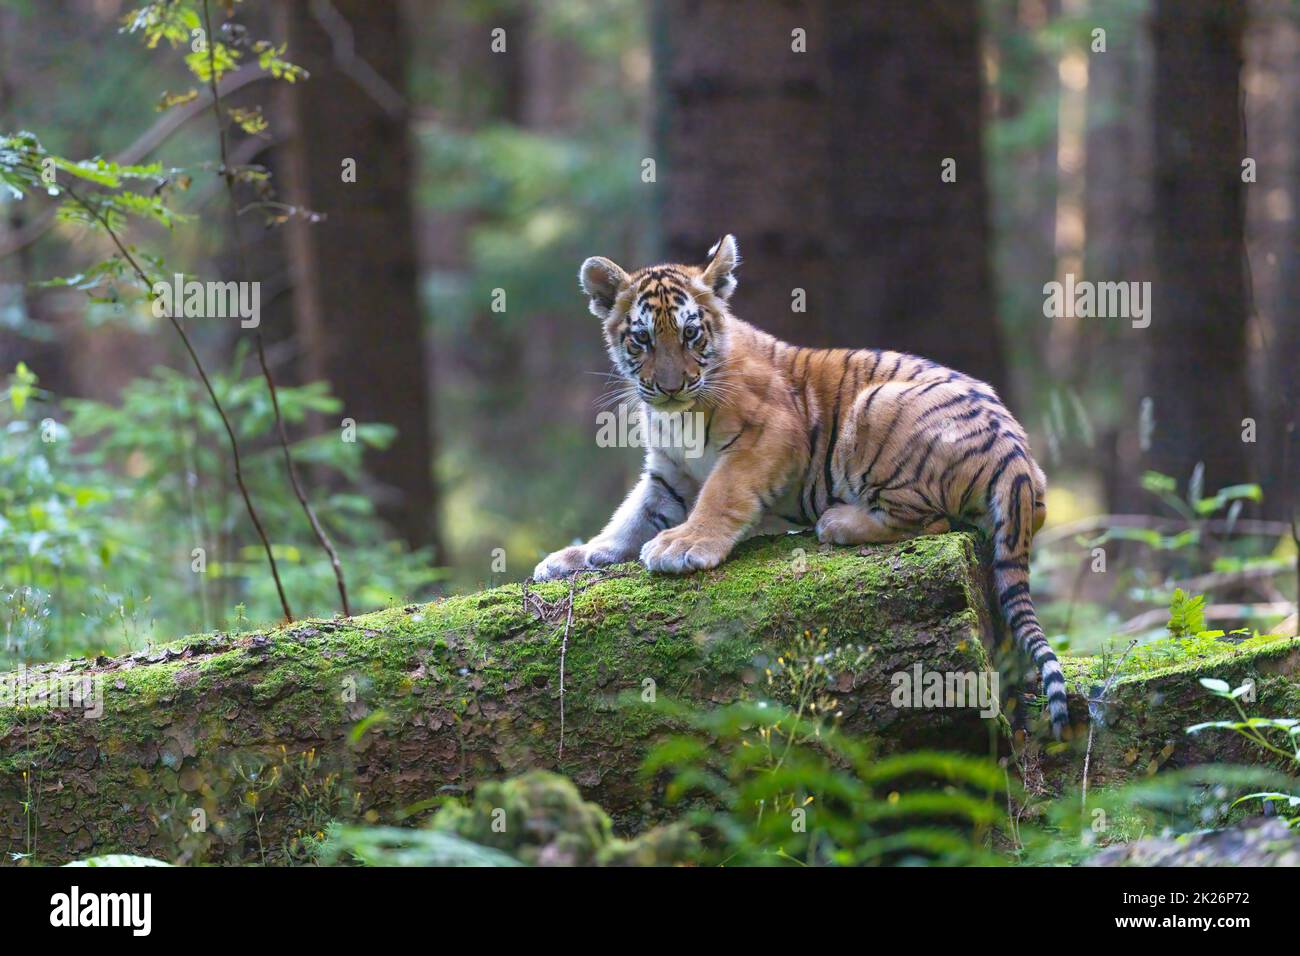 Bengal tiger cub is posing on a fallen tree trunk. Stock Photo